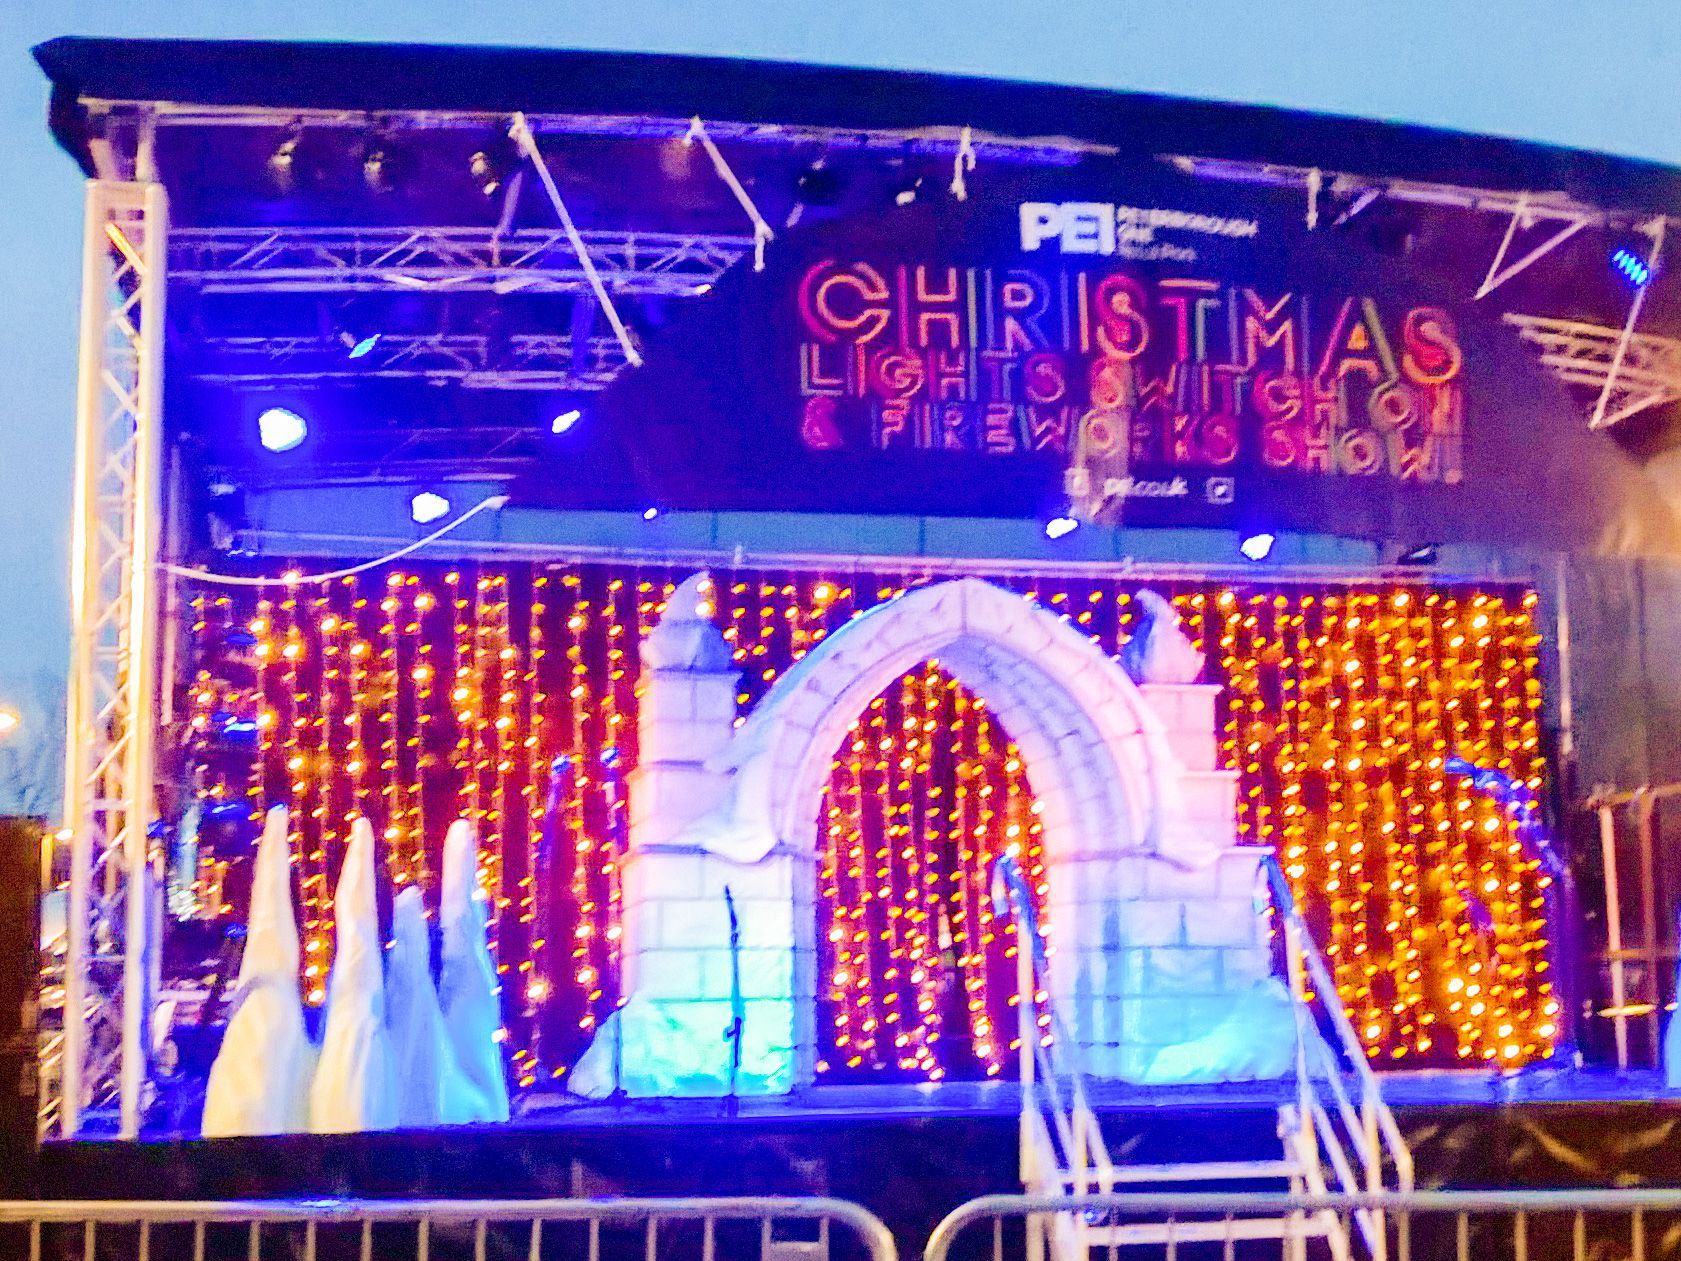 Trailer stage at a light switch on event with festive snow decorations on stage